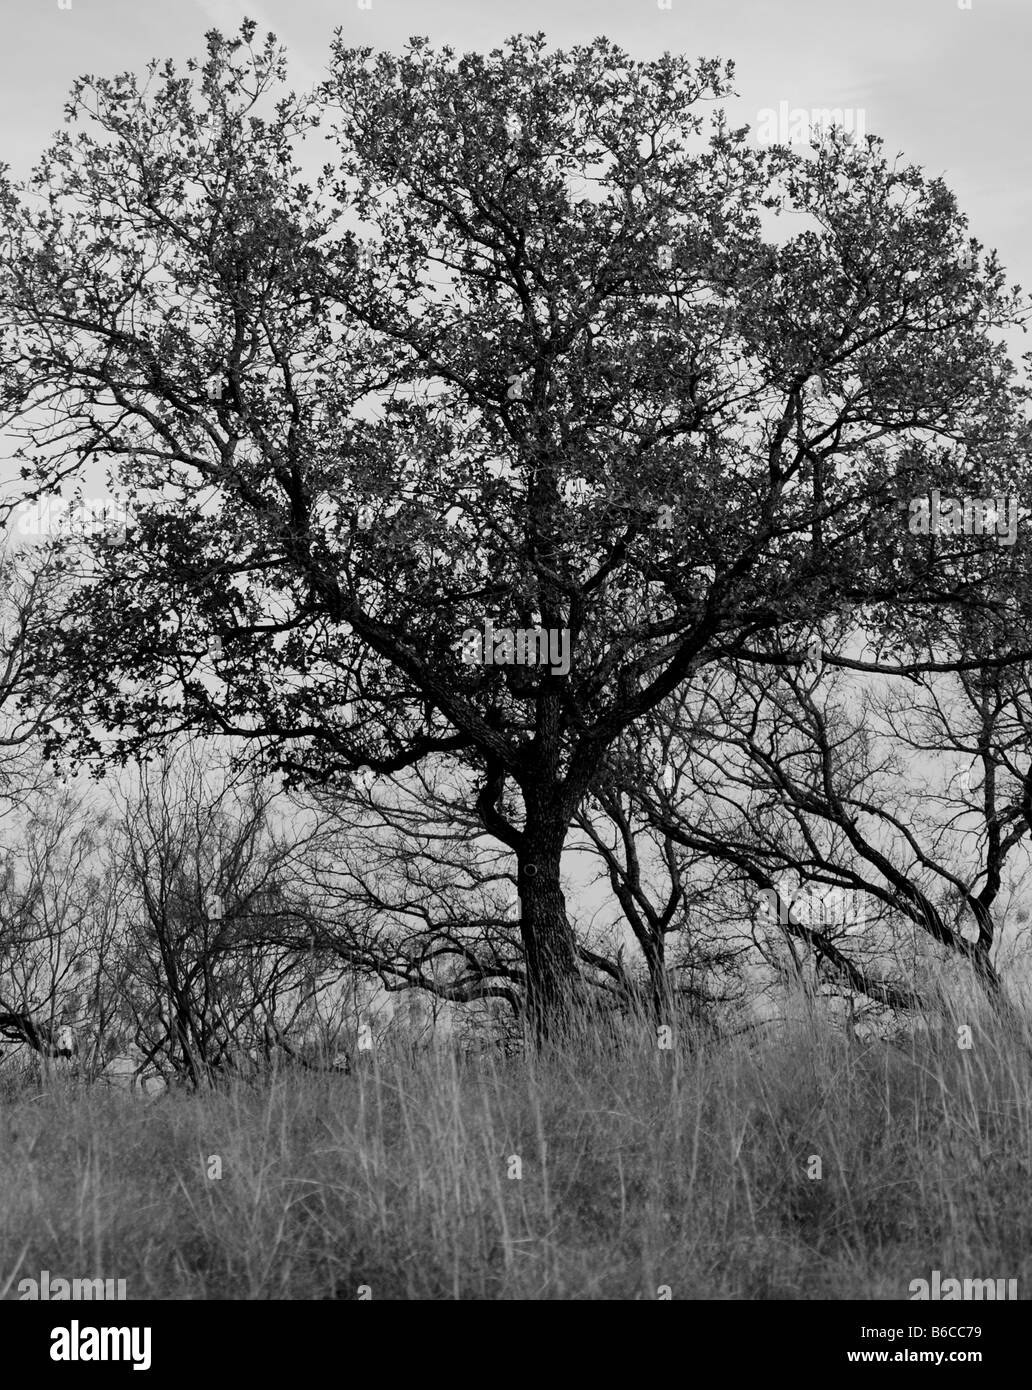 Black and white image of a tree in autumn Stock Photo